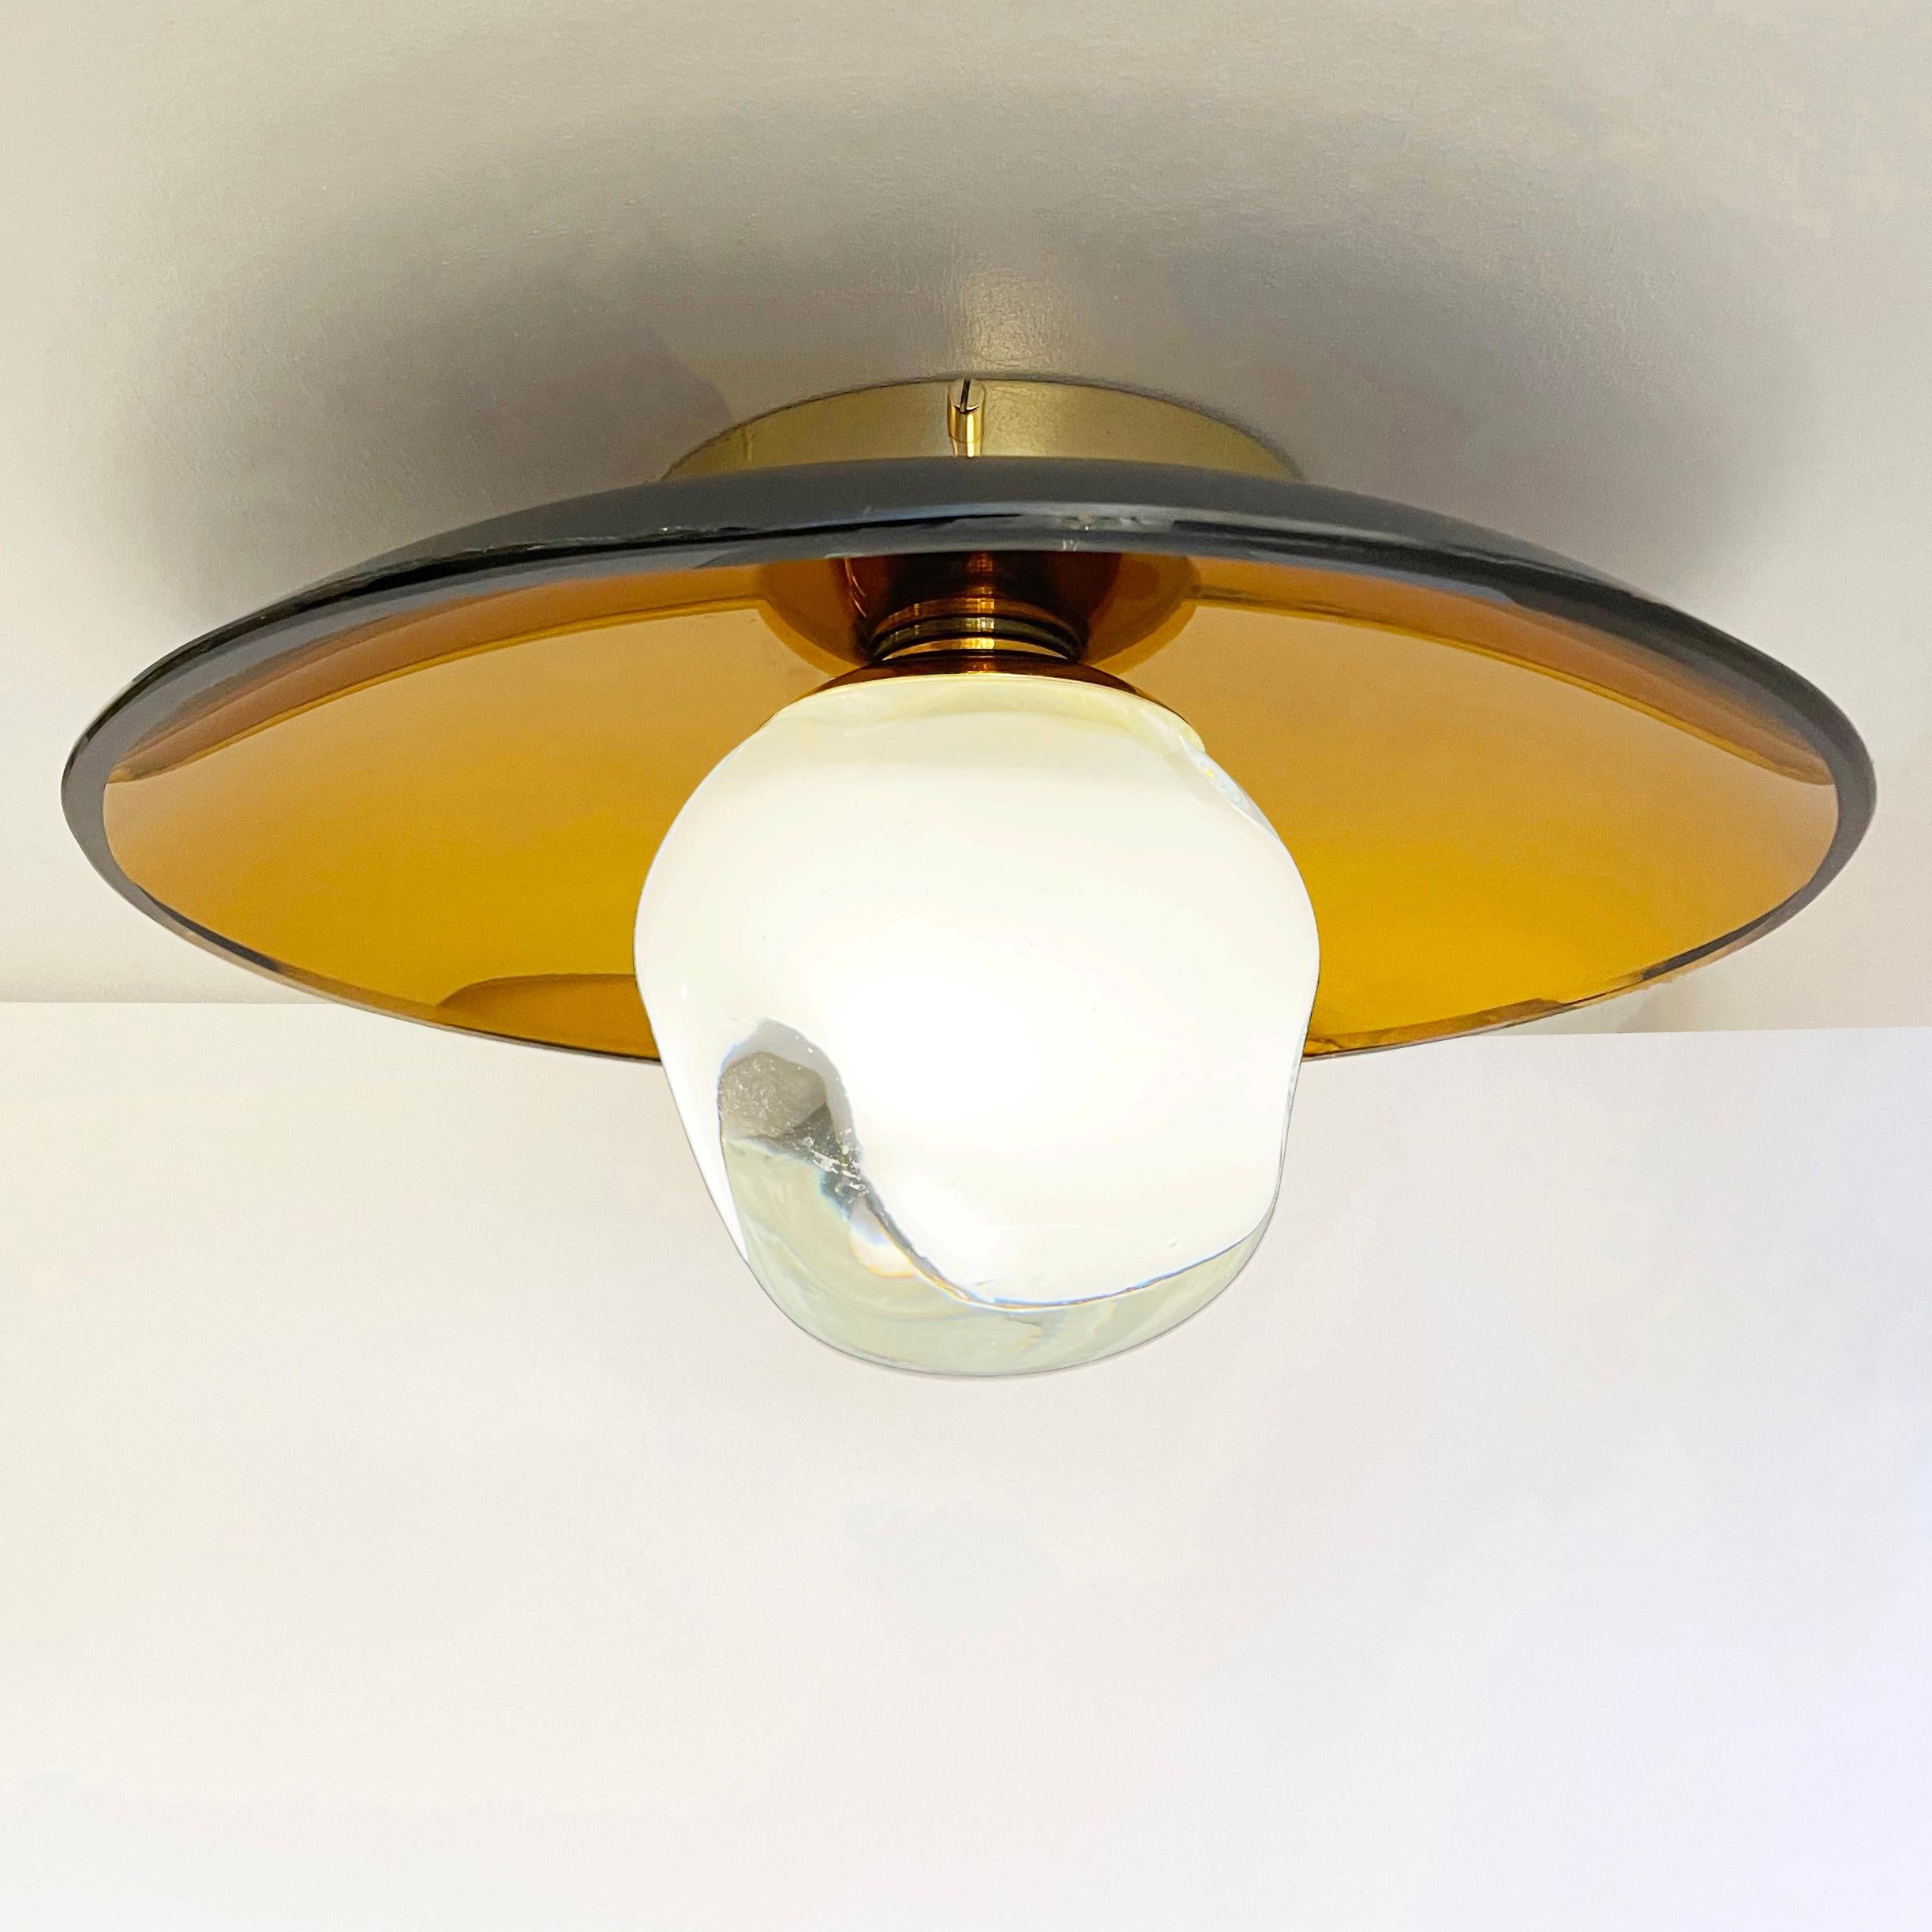 The versatile Sole light can be installed as a ceiling light or wall light and features our handblown Sfera glass mounted on a colored reflective glass dish. Shown with the amber colored reflective glass and polished brass hardware.

Customization